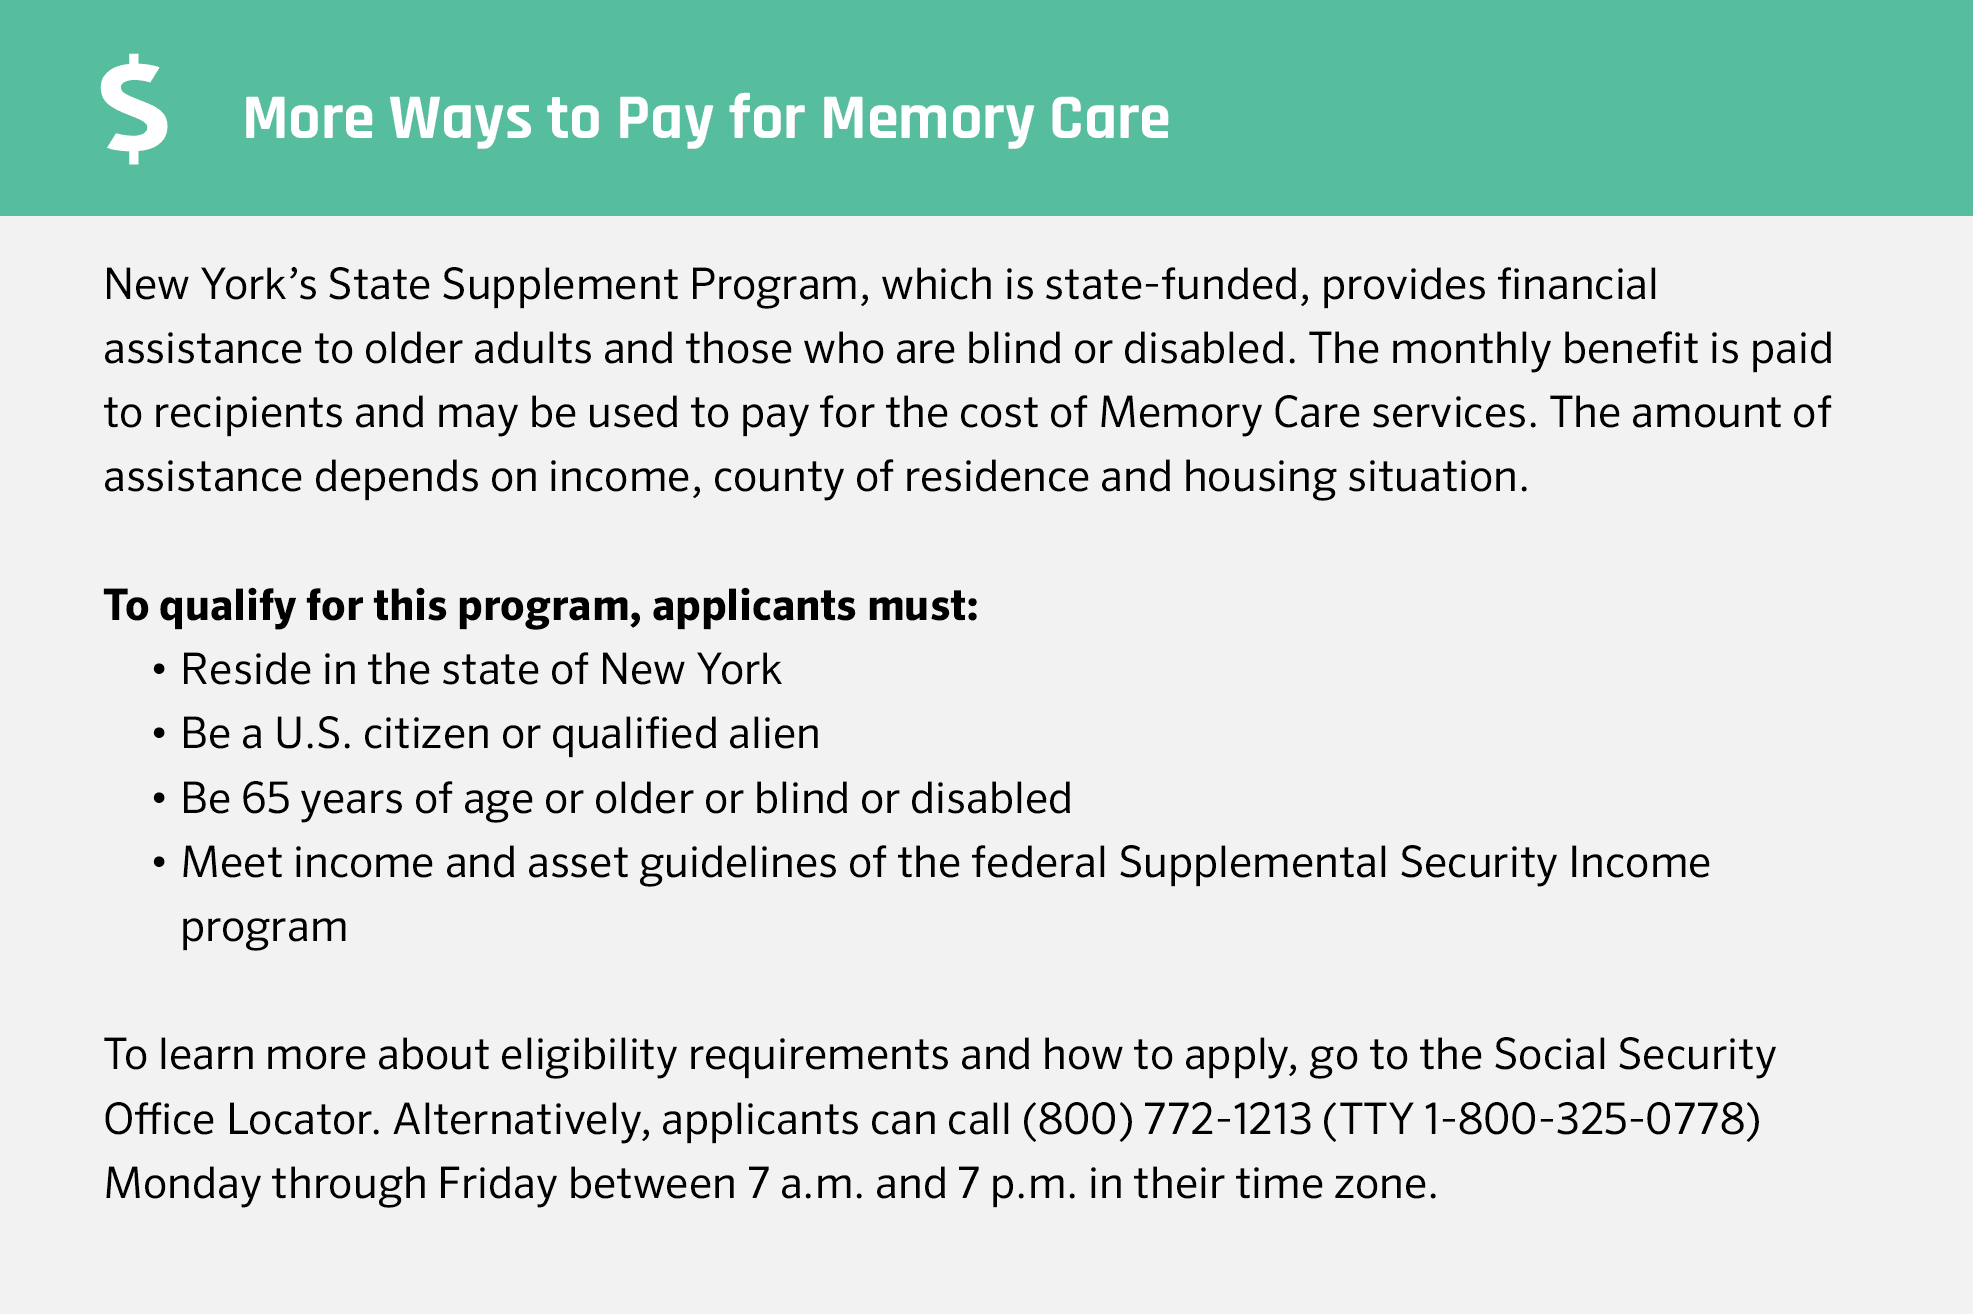 More ways to pay for memory car ein New York